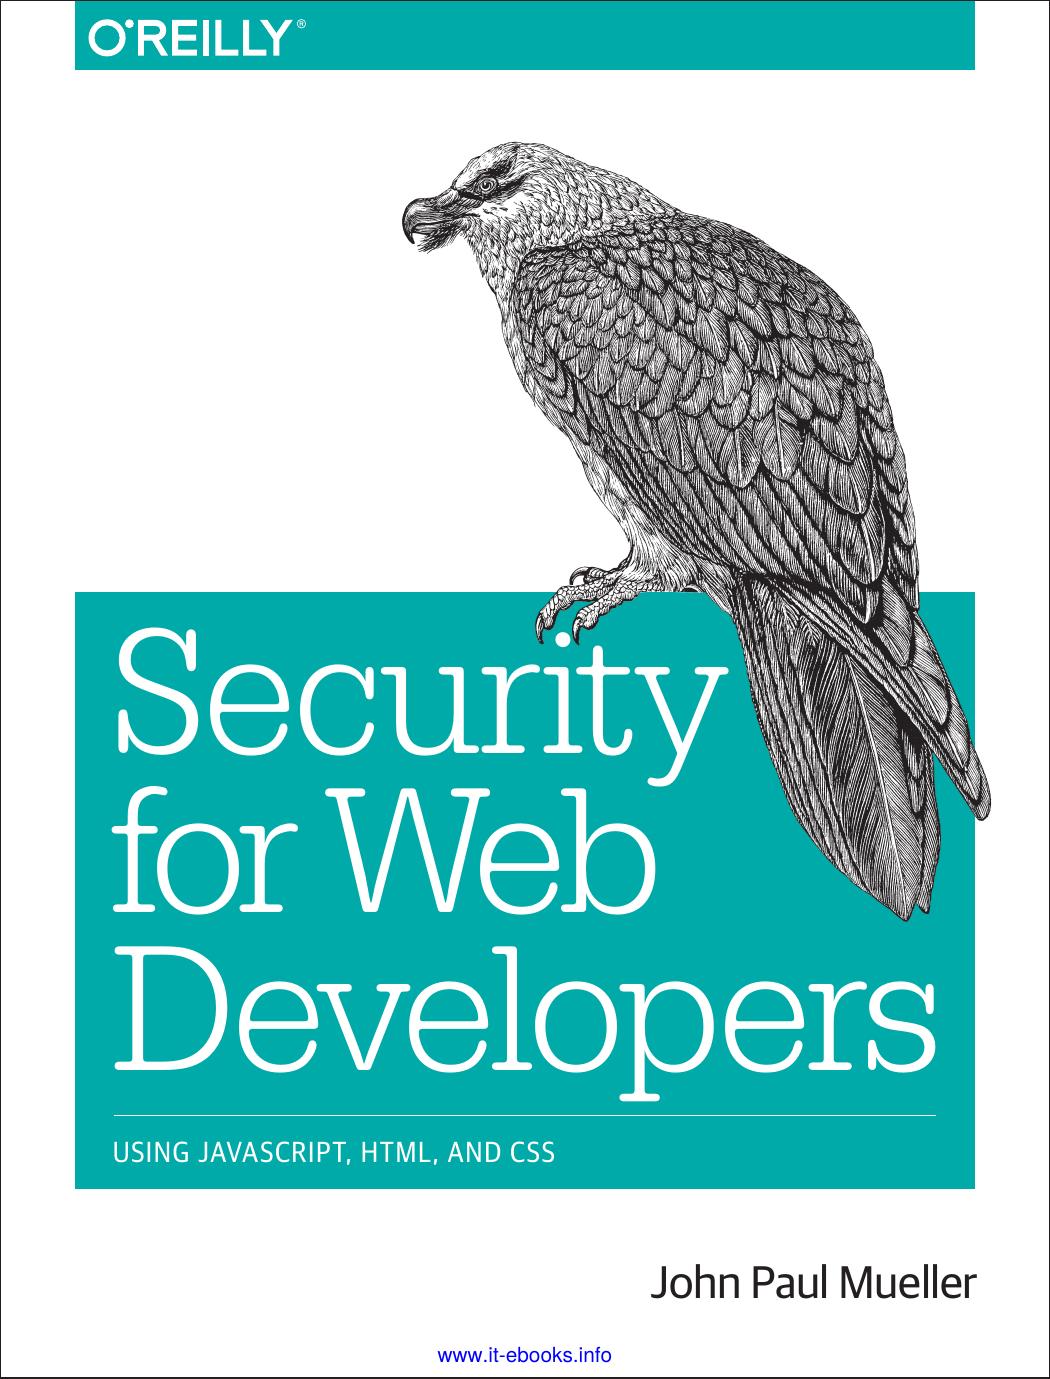 Security for Web Developers by John Paul Mueller